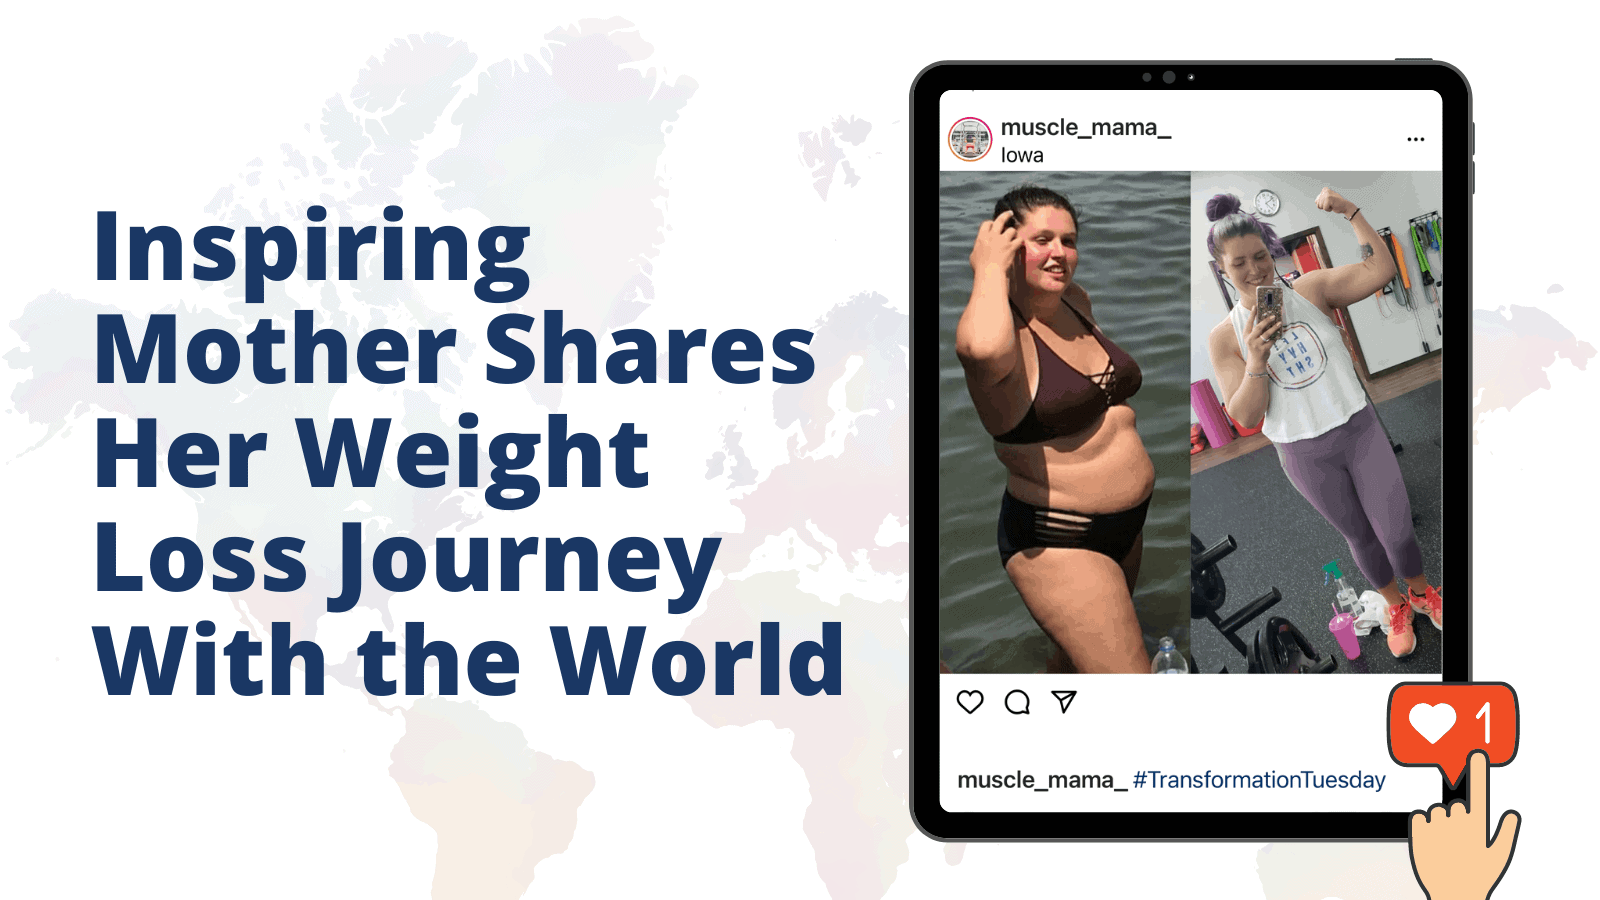 Inspiring Mother Shares Her Weight Loss Journey With the World